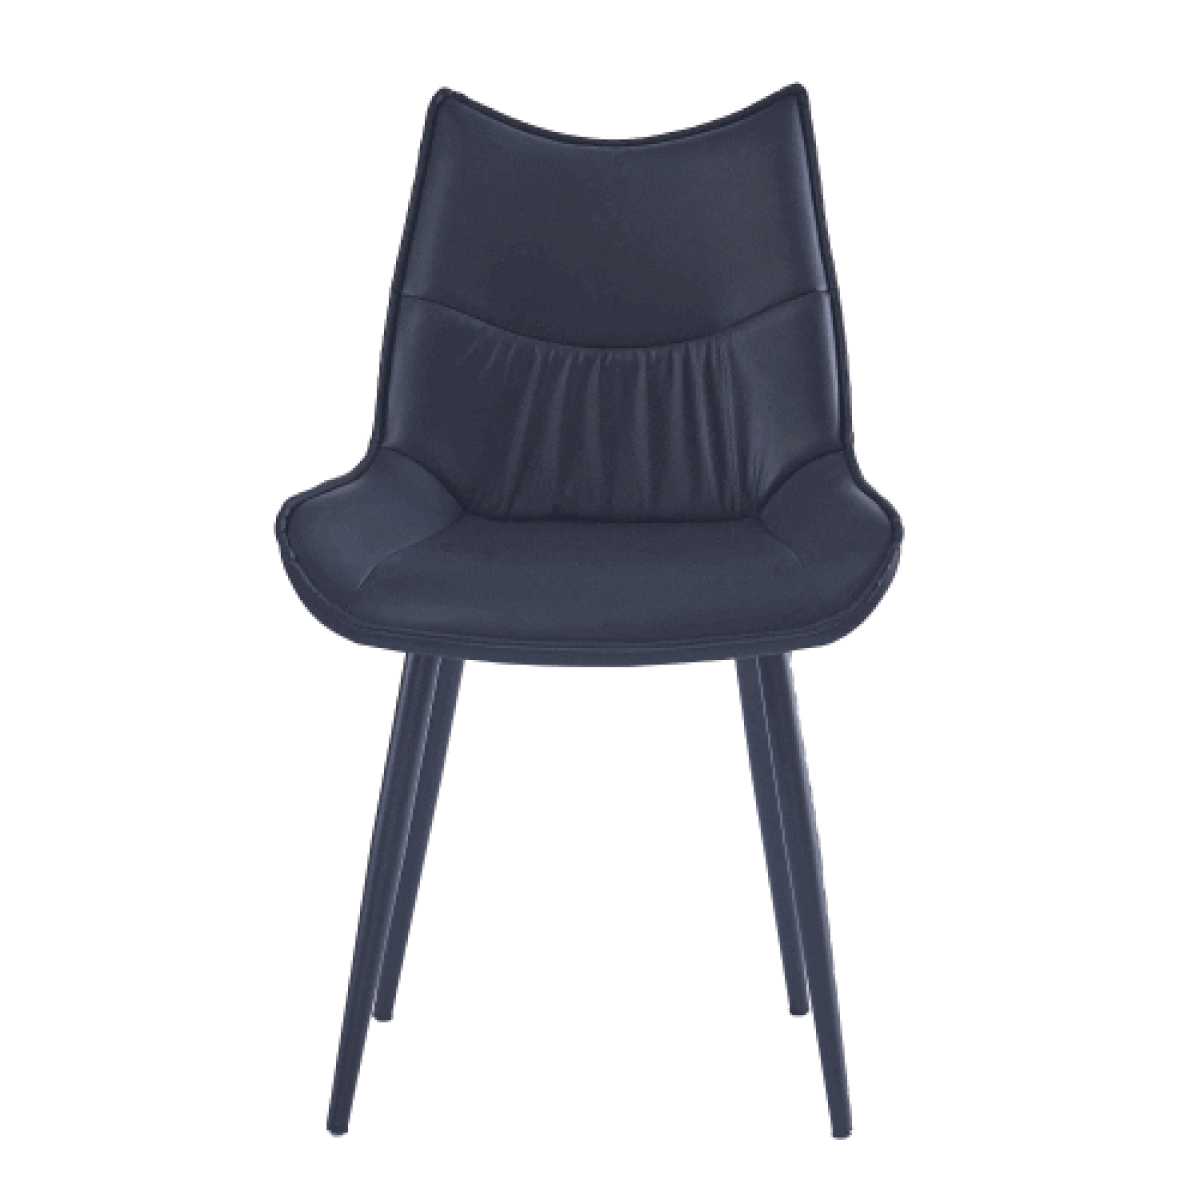 Criterion Jett Dining Chair 830mm PU Leather Cushioned Seat, Carbon Steel Frame Black